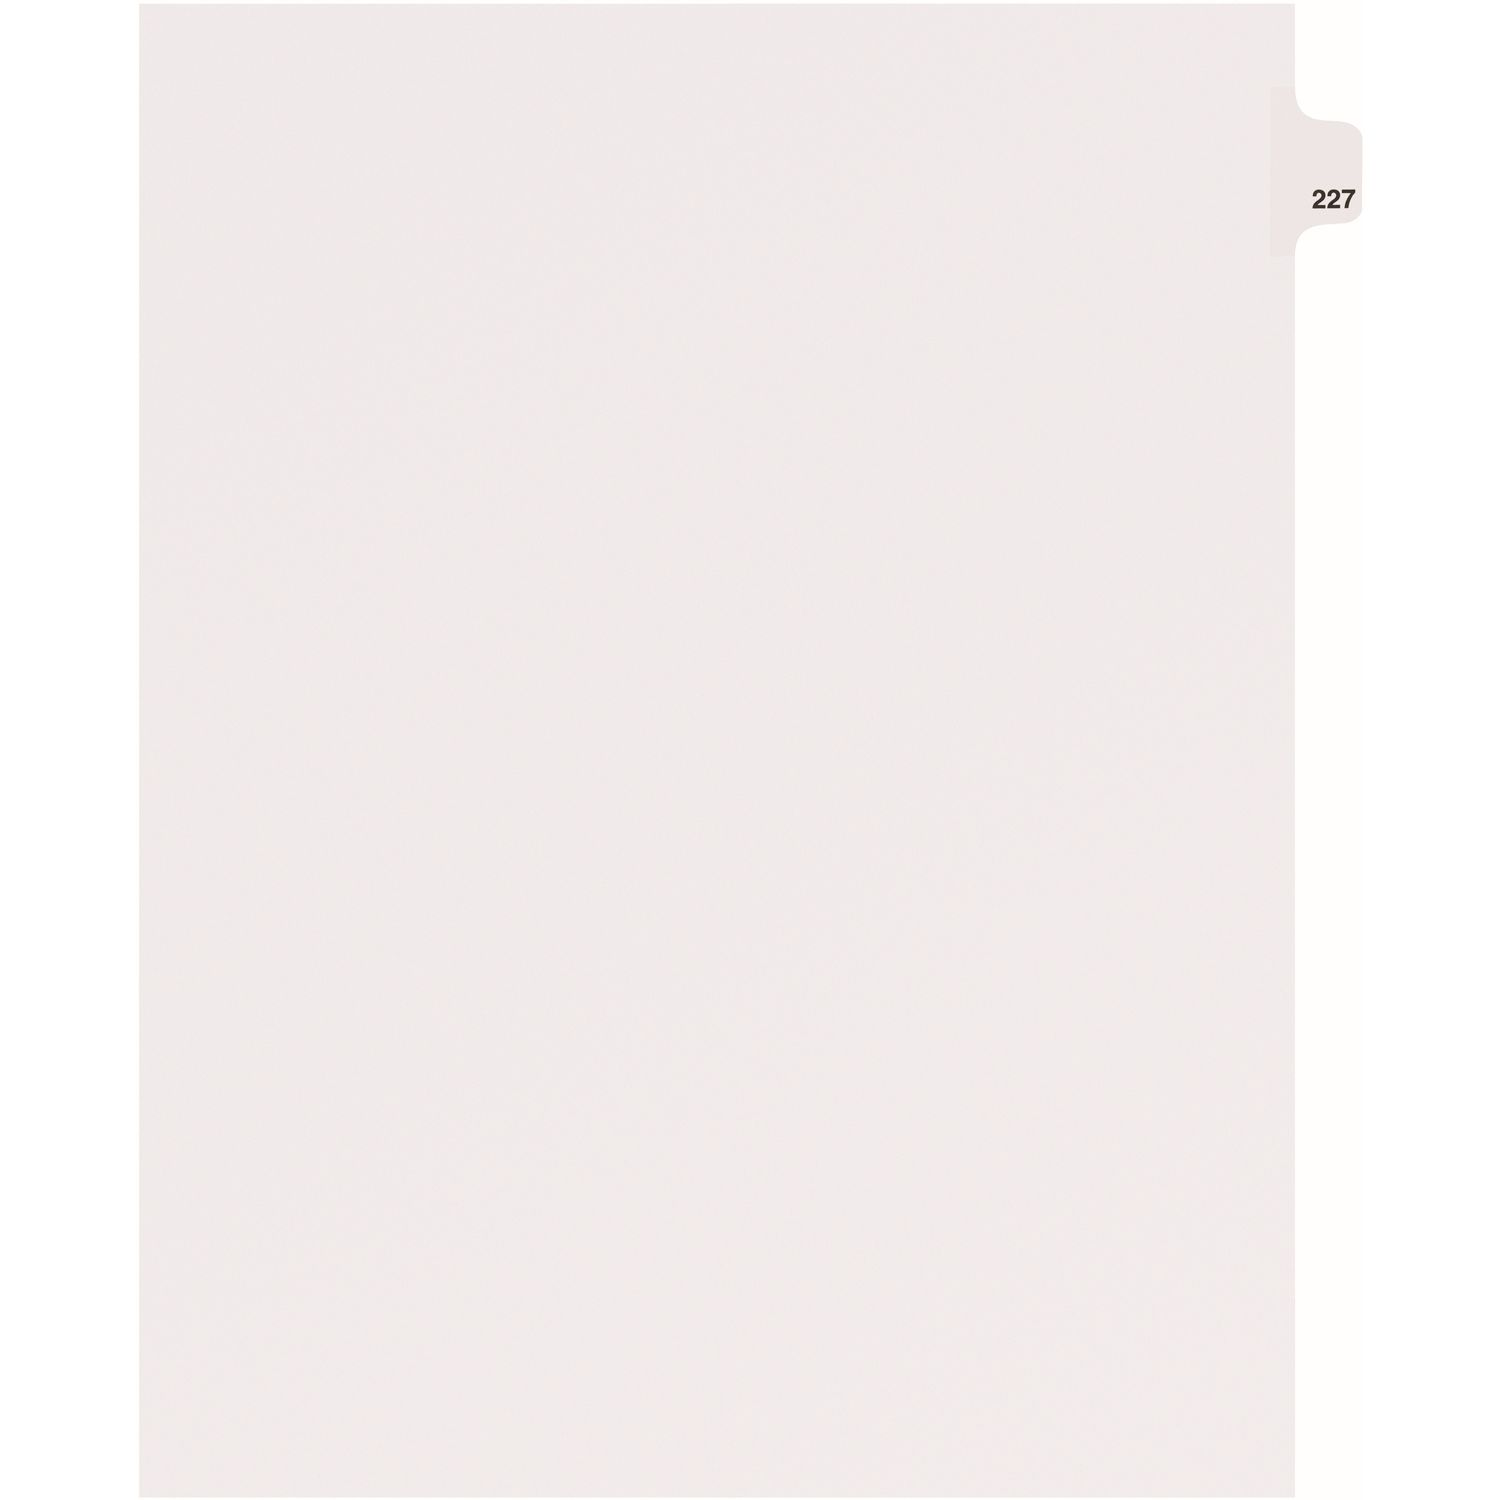 Side Tab Individual Legal Dividers 25 x Divider(s), Side Tab(s), 227, 1 Tab(s)/Set, Letter, 8 1/2" Width x 11" Length, White Paper Divider, 1